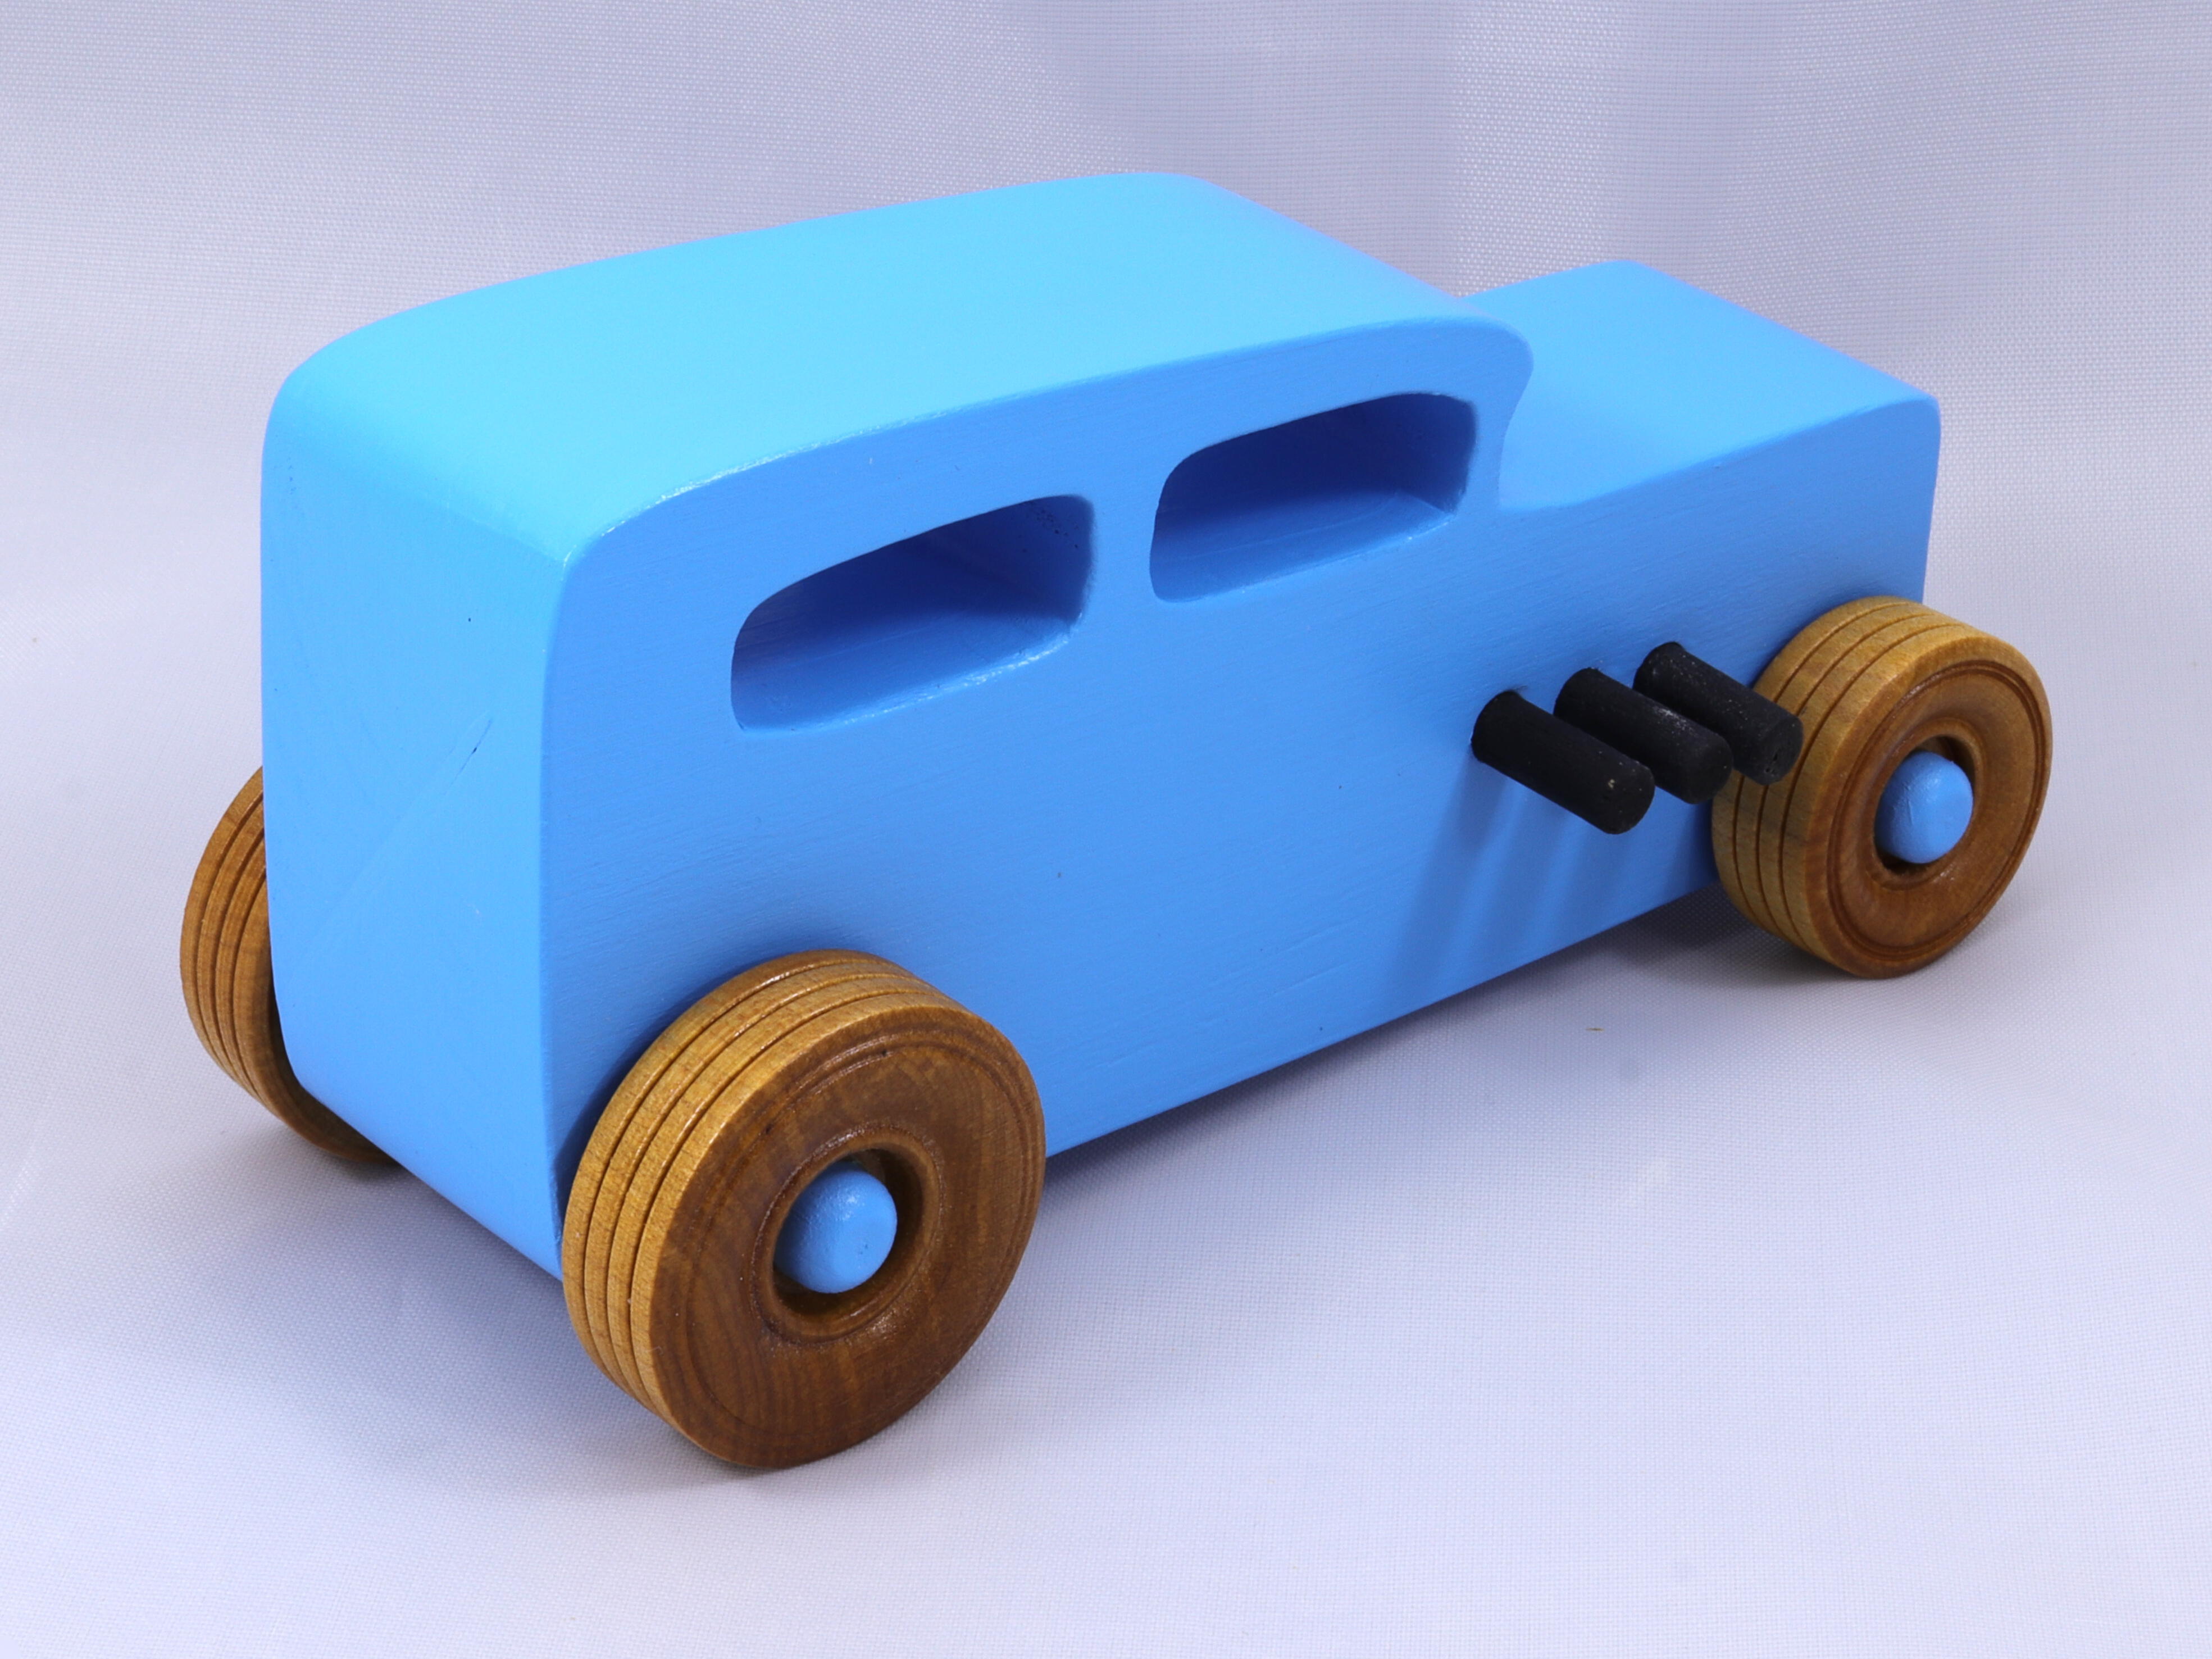 https://d1q8o8ch5u48ua.cloudfront.net/images/detailed/2027/20201108-093845_032_Handmade_Toy_Hot_Rod_Freaky_Ford_32_Sedan_Baby_Blue_572729767.jpg?t=1694300521